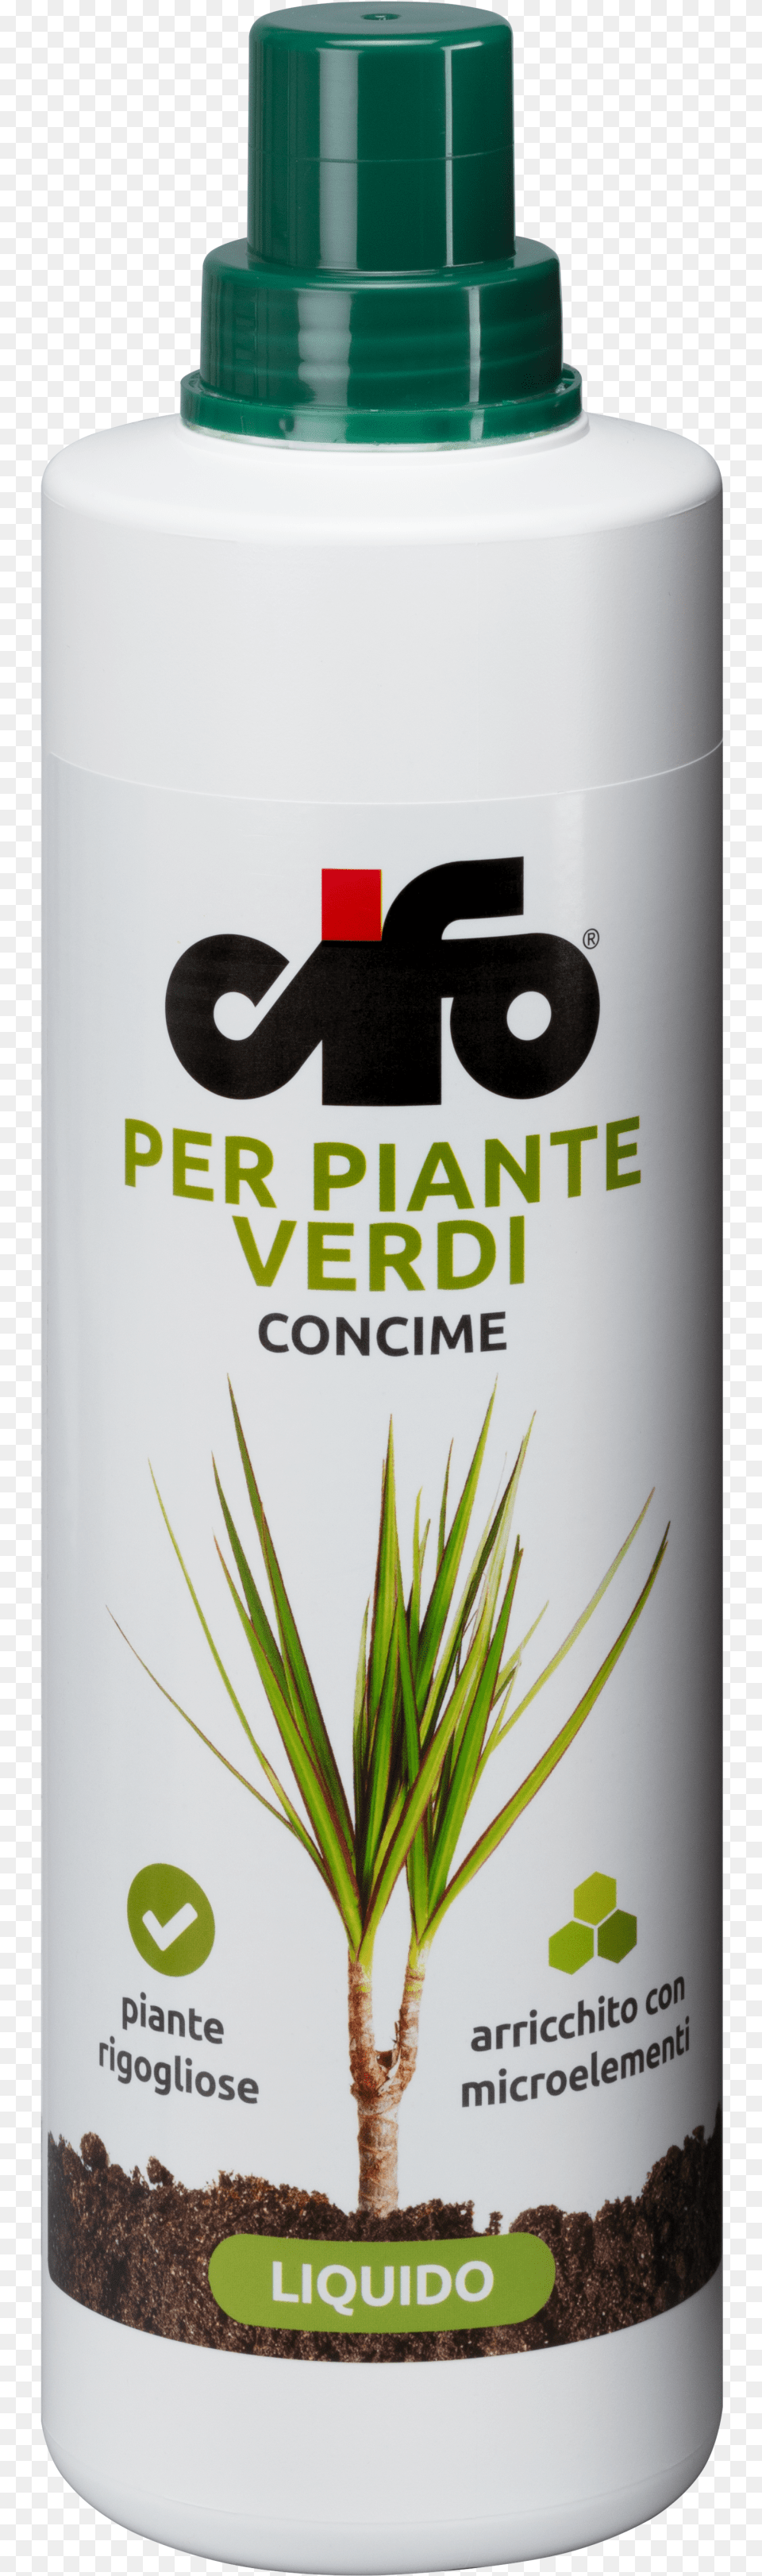 Yucca Plant, Bottle, Herbal, Herbs, Shaker Png